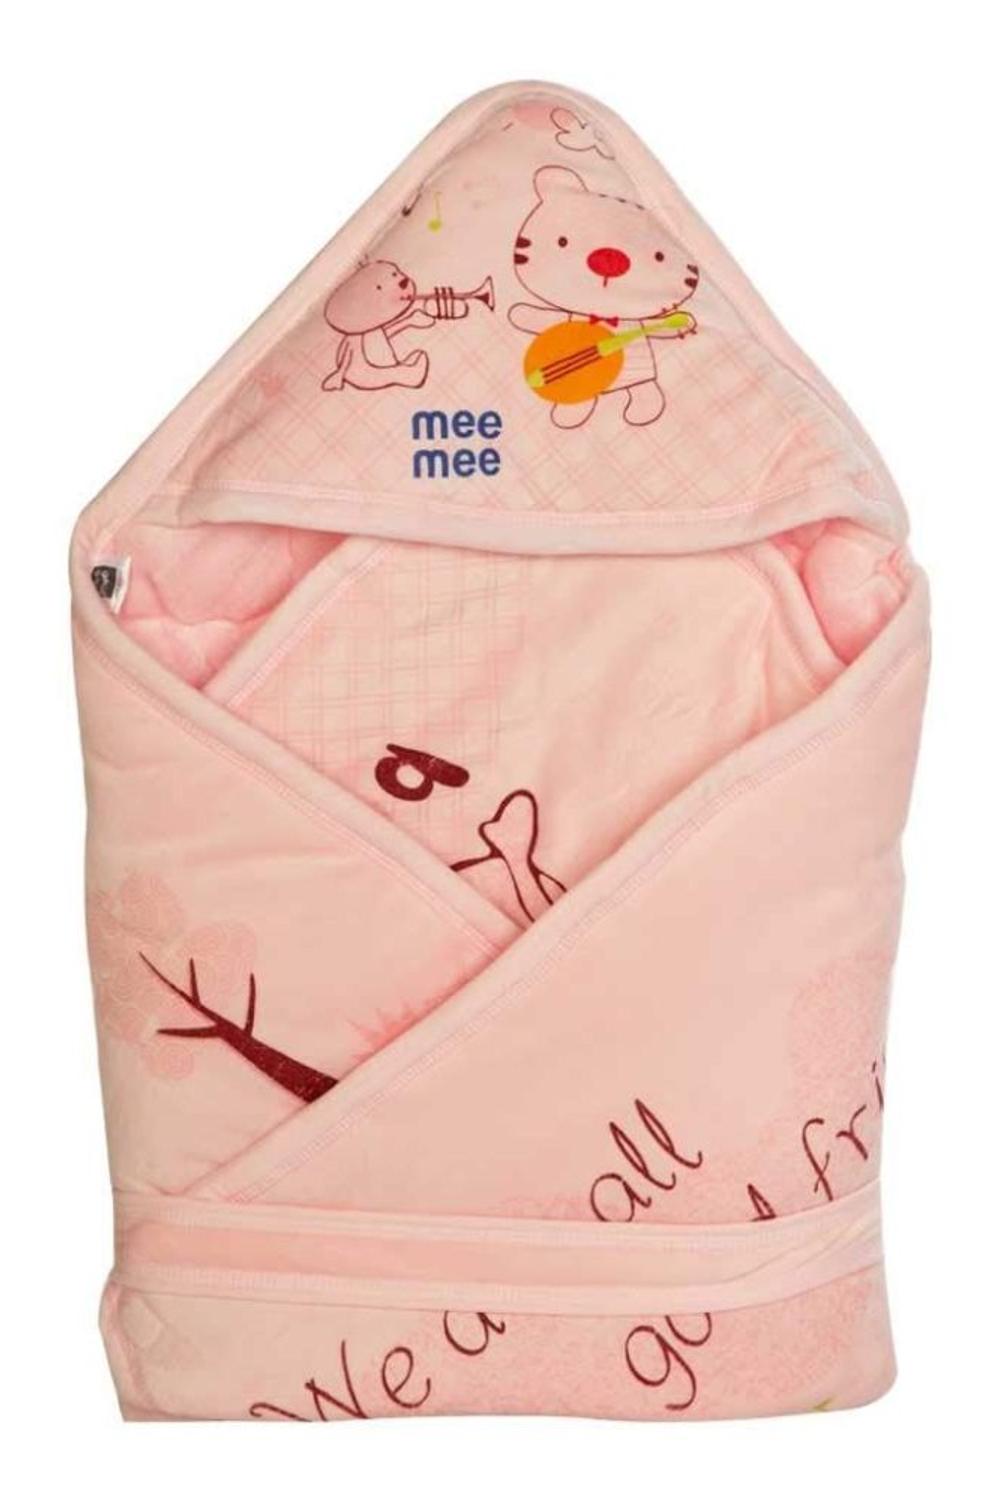 Mee Mee Baby Warm and Soft Swaddle Wrapper with Hood Double Layer for Newborn Babies (Pink)